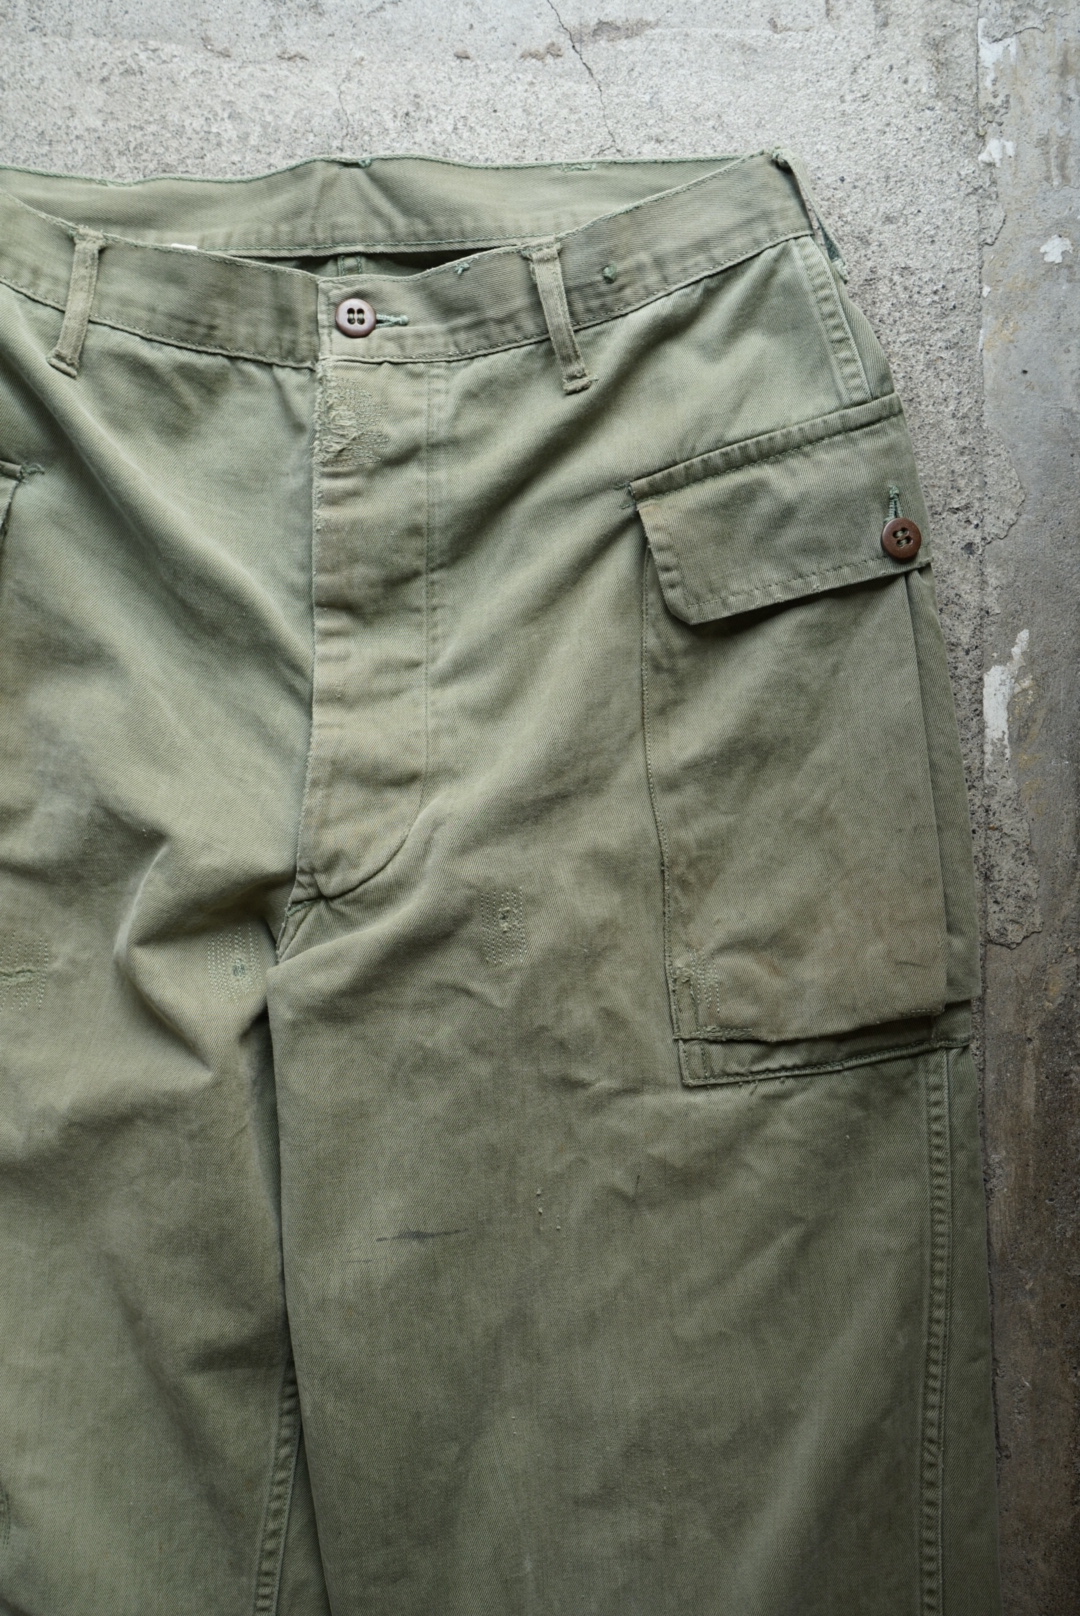 US ARMY M43 FIELD TROUSERS SIDE POCKET - US VINTAGE - ARCH ONLINE SHOP